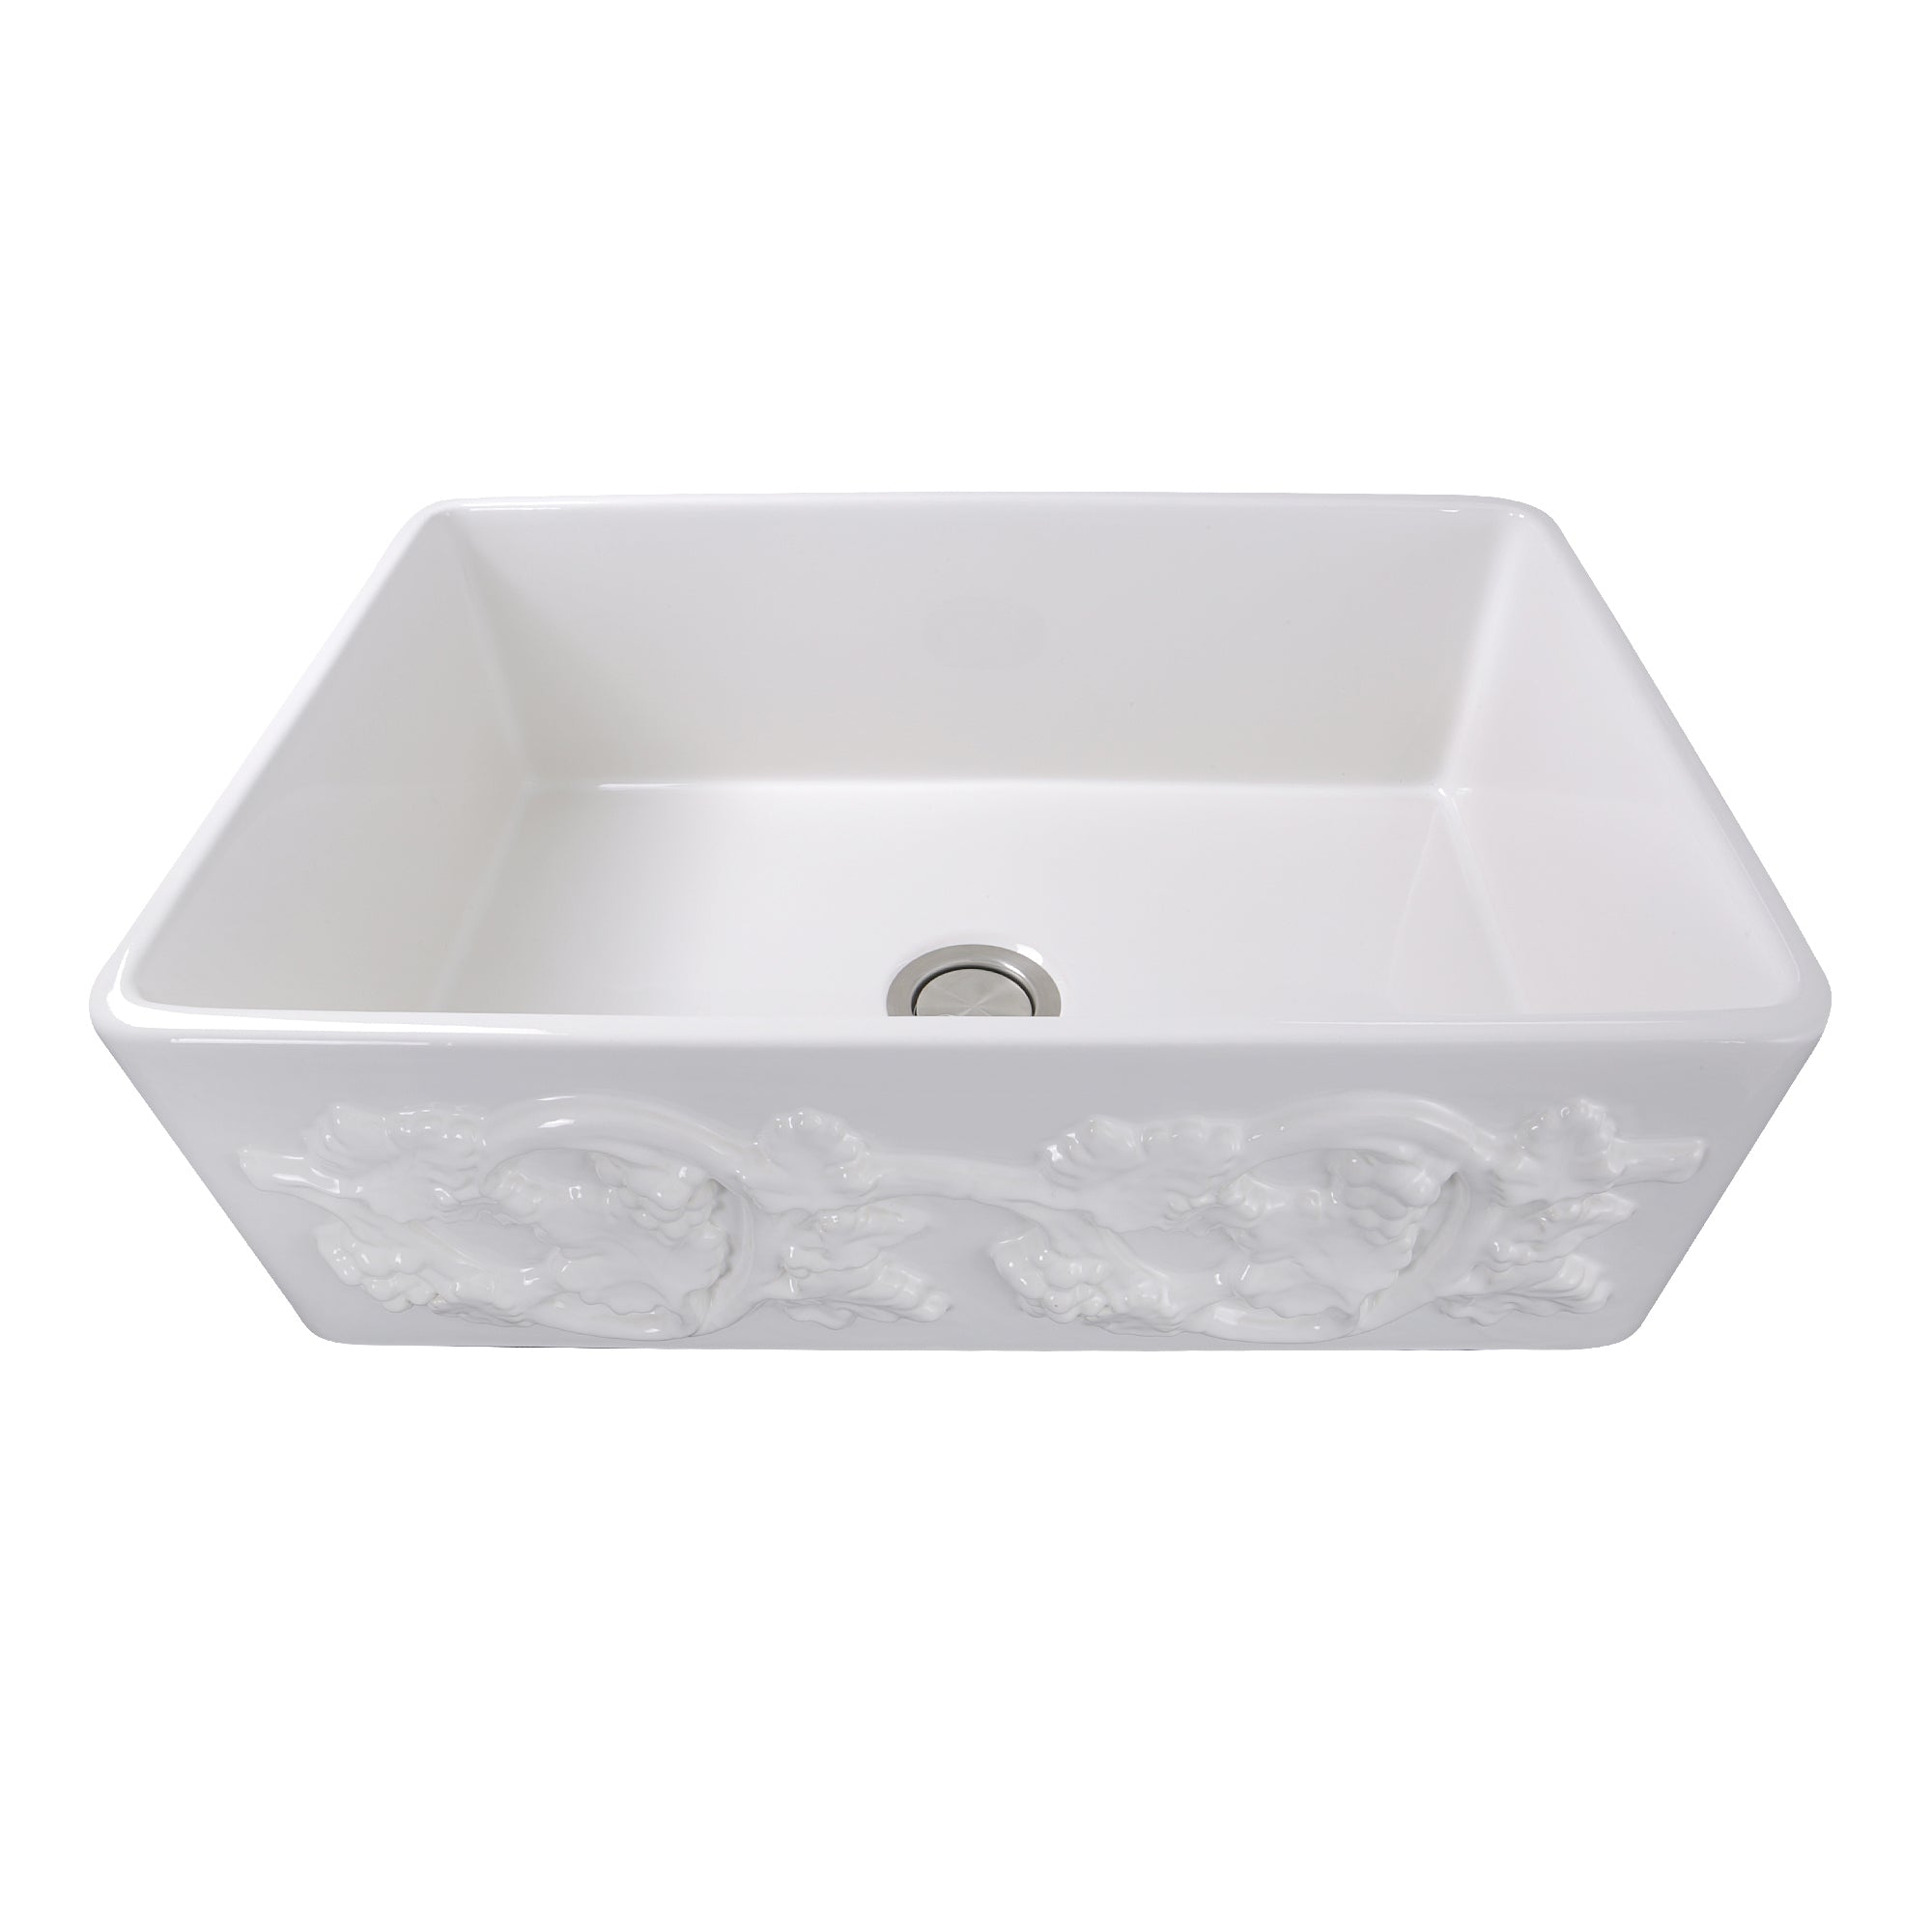 Nantucket Sinks 30" Farmhouse Fireclay Sink with Grapes Apron